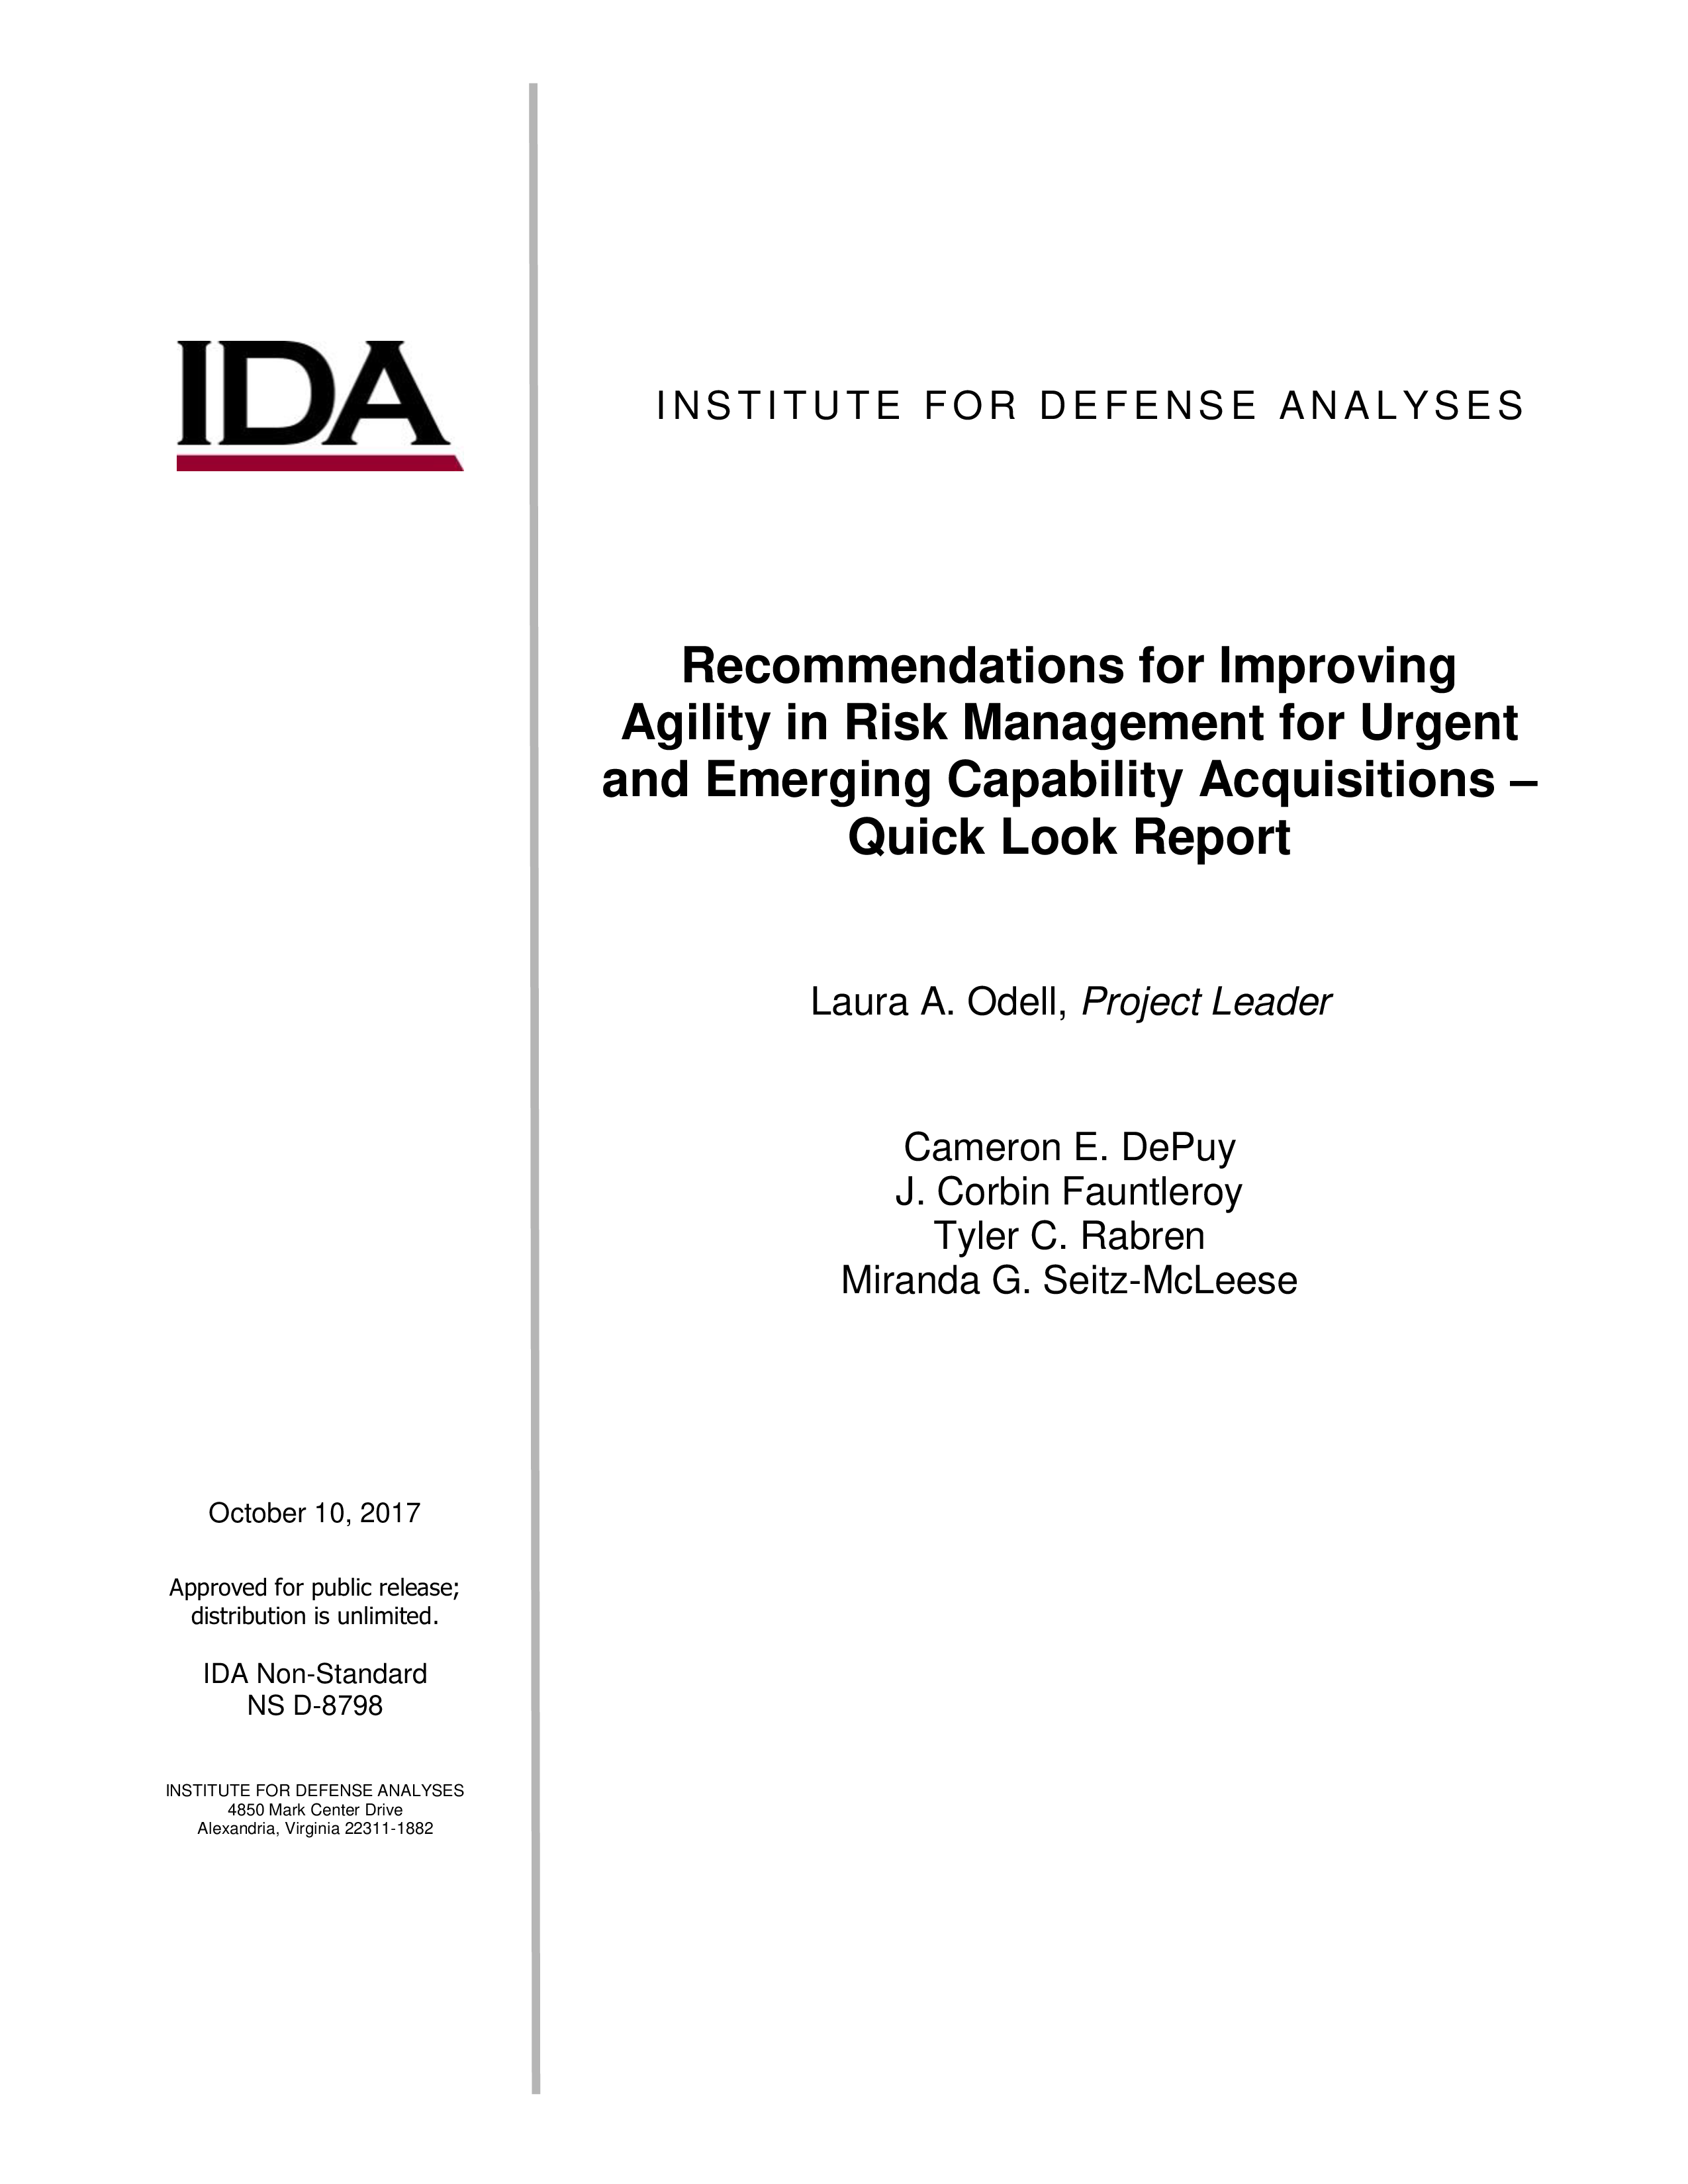 Recommendations for Improving Agility in Risk Management for Urgent and Emerging Capability Acquisitions – Quick Look Report